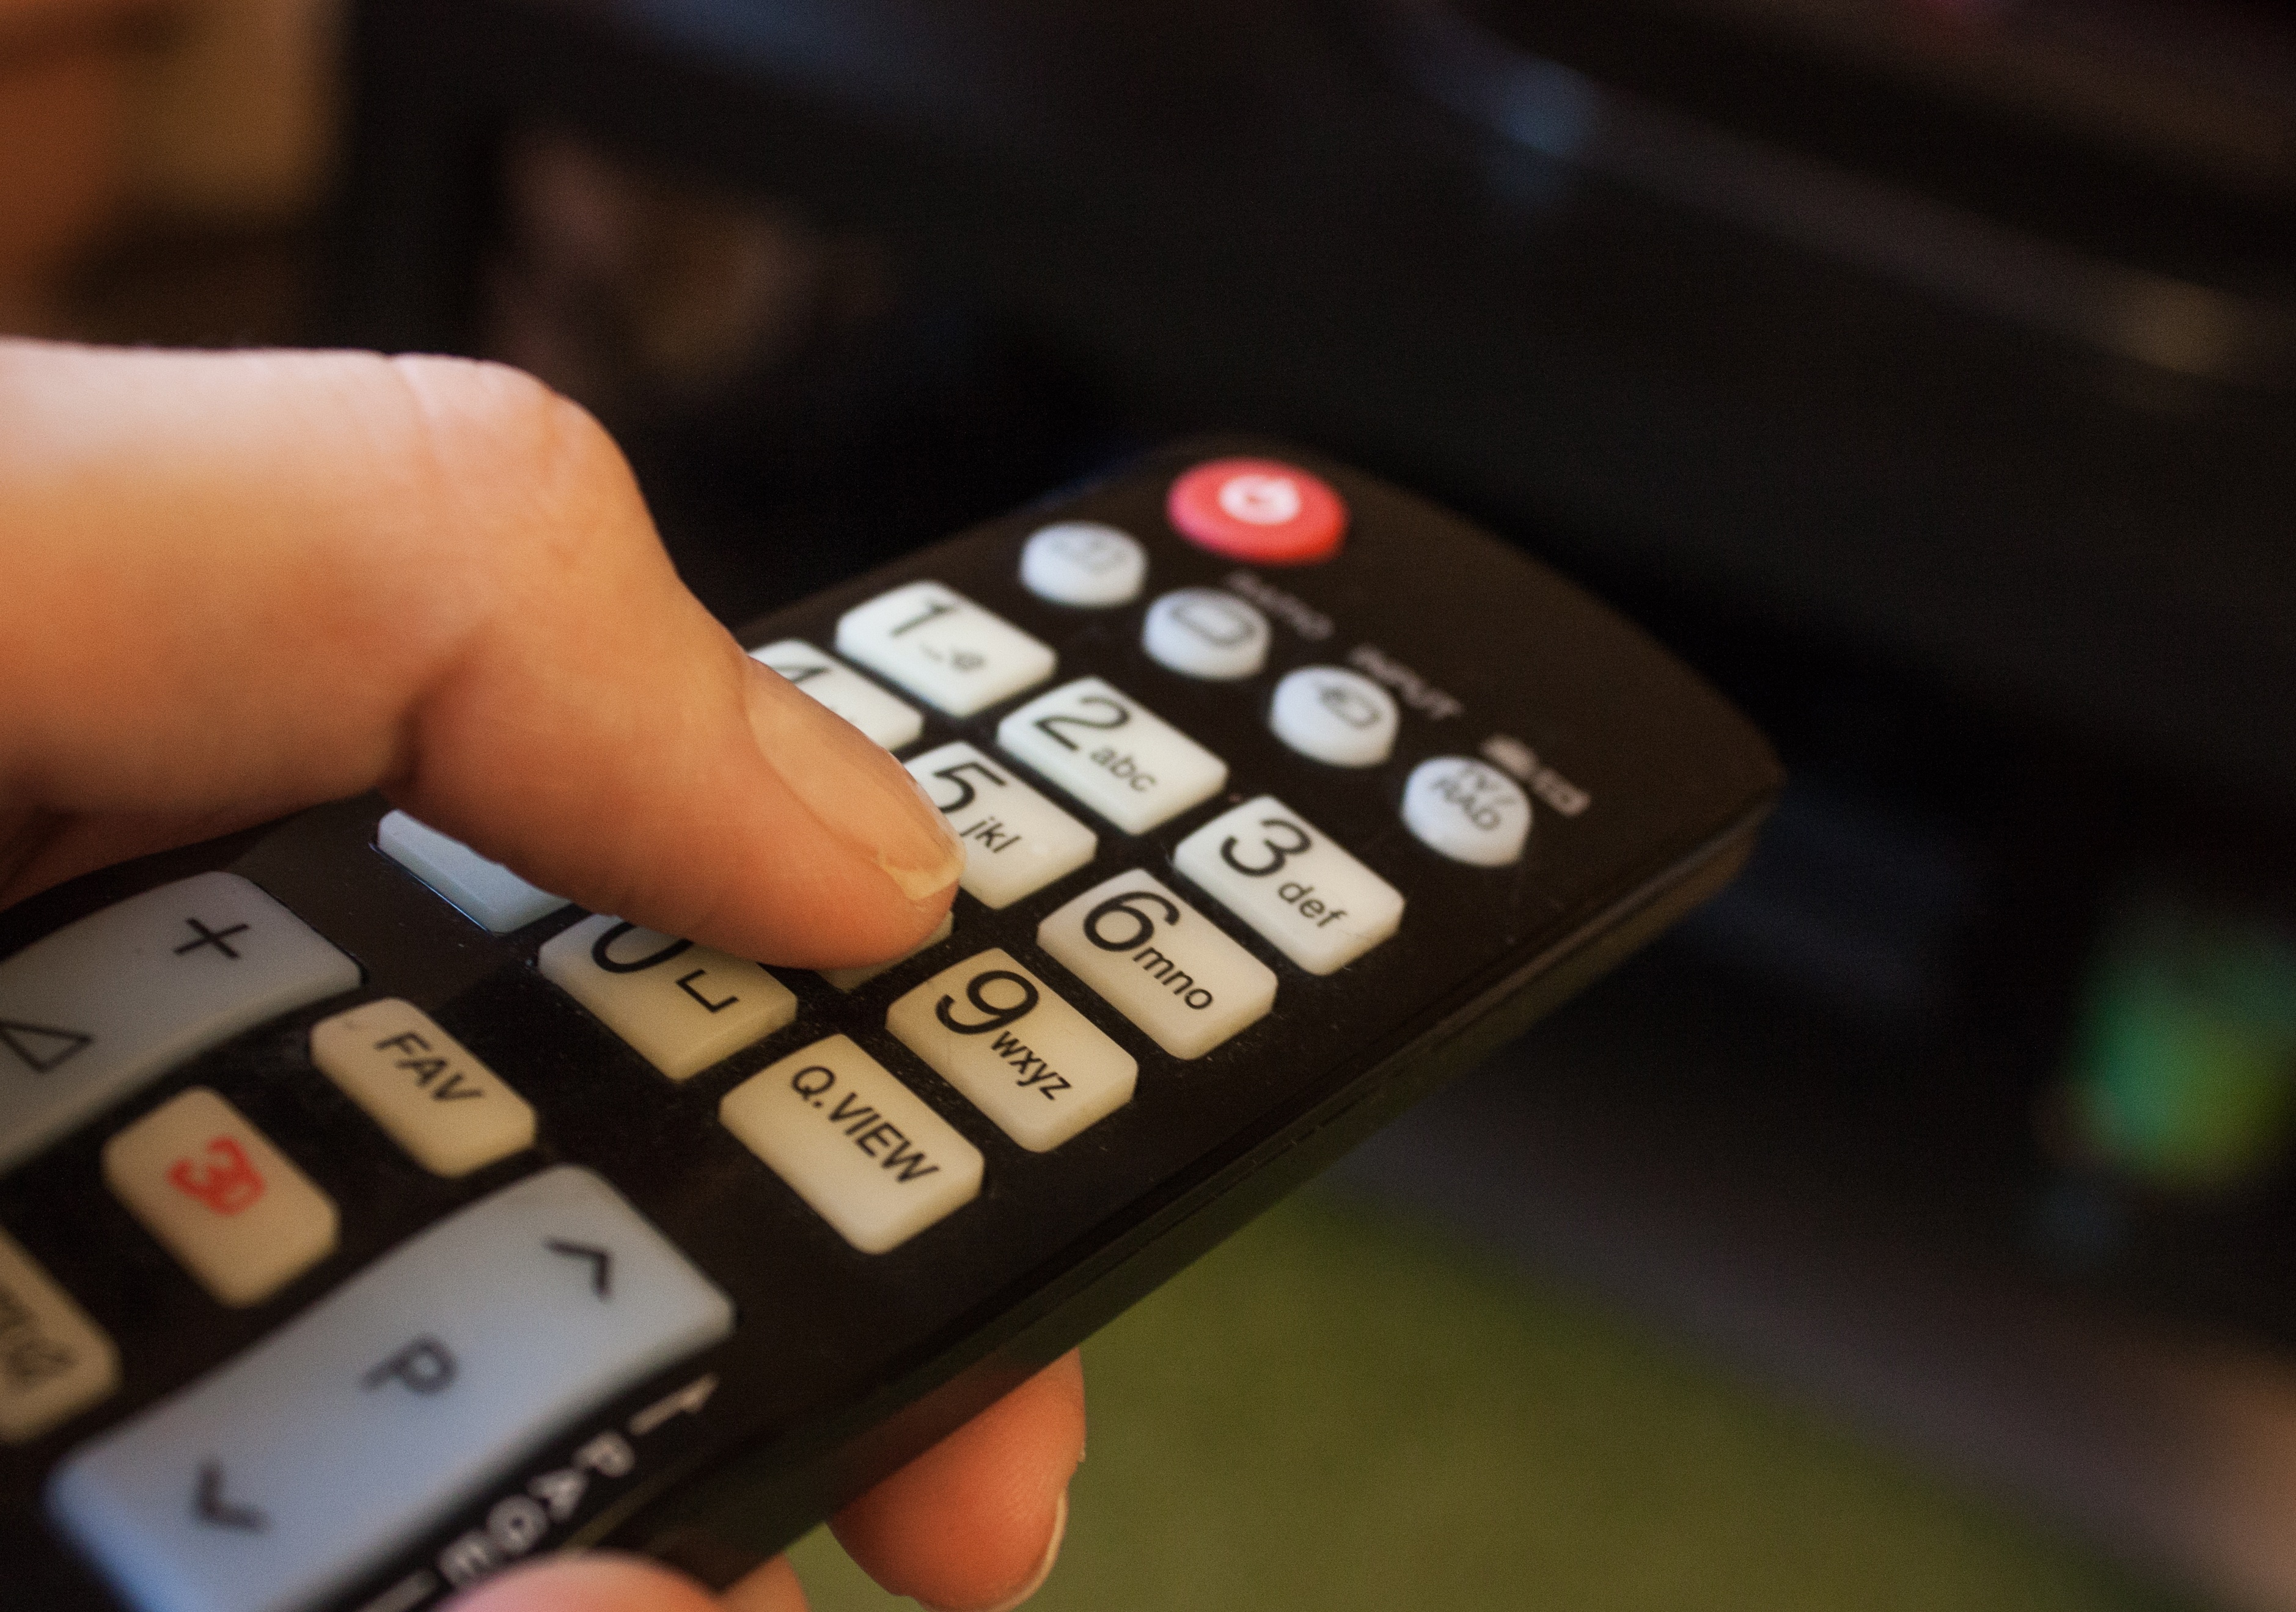 Universal remote for tv